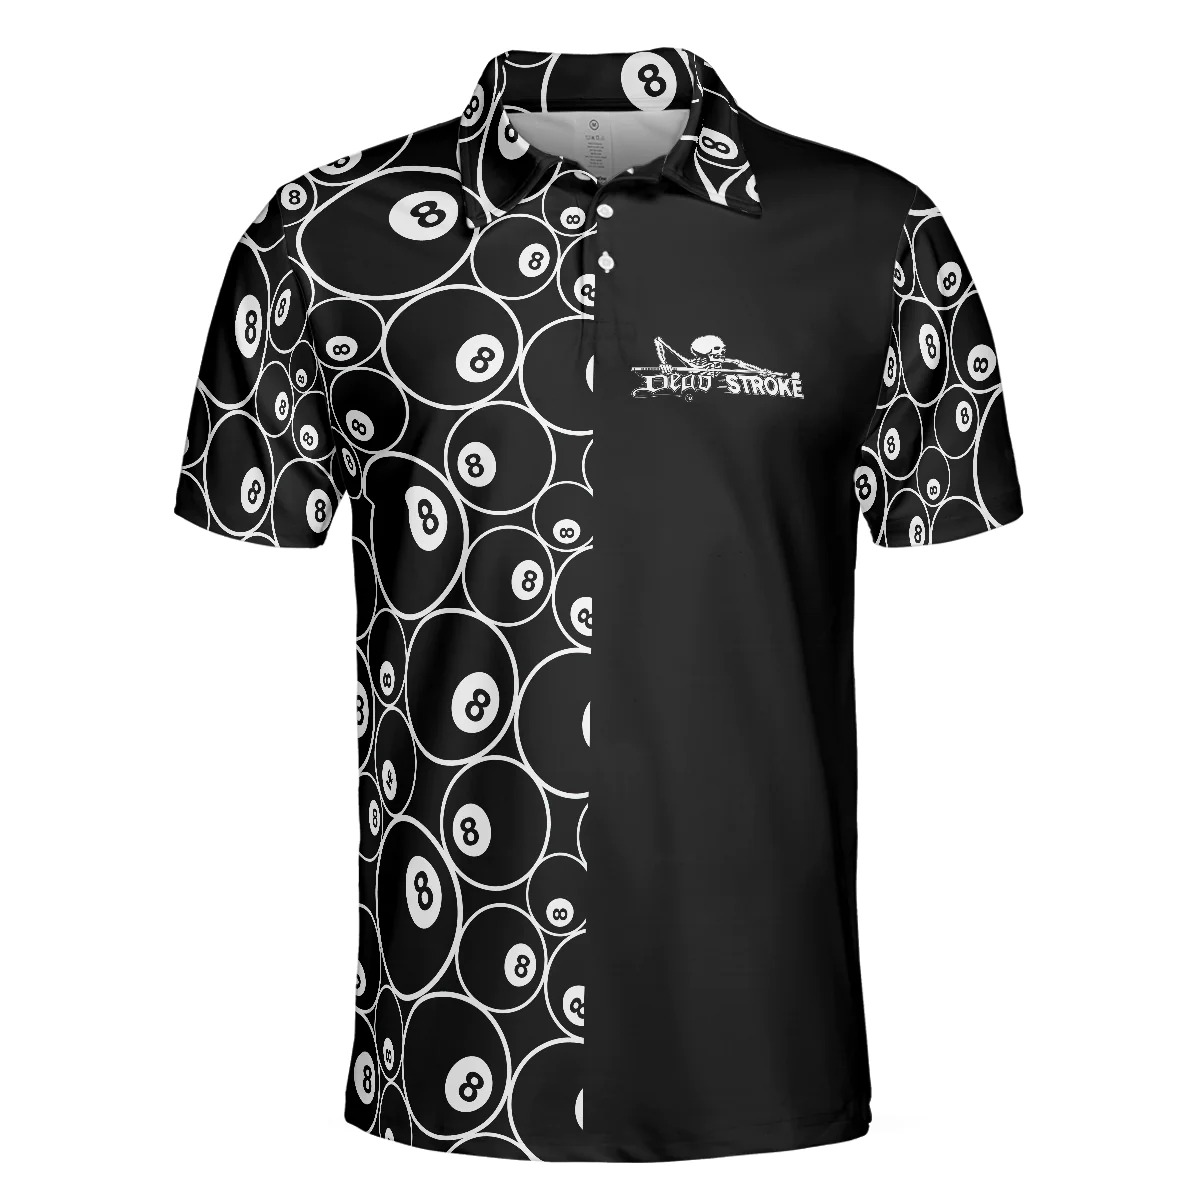 Just The Tip I Promise Billiards Custom Polo Shirt/ Personalized Billiards Polo Shirt Design